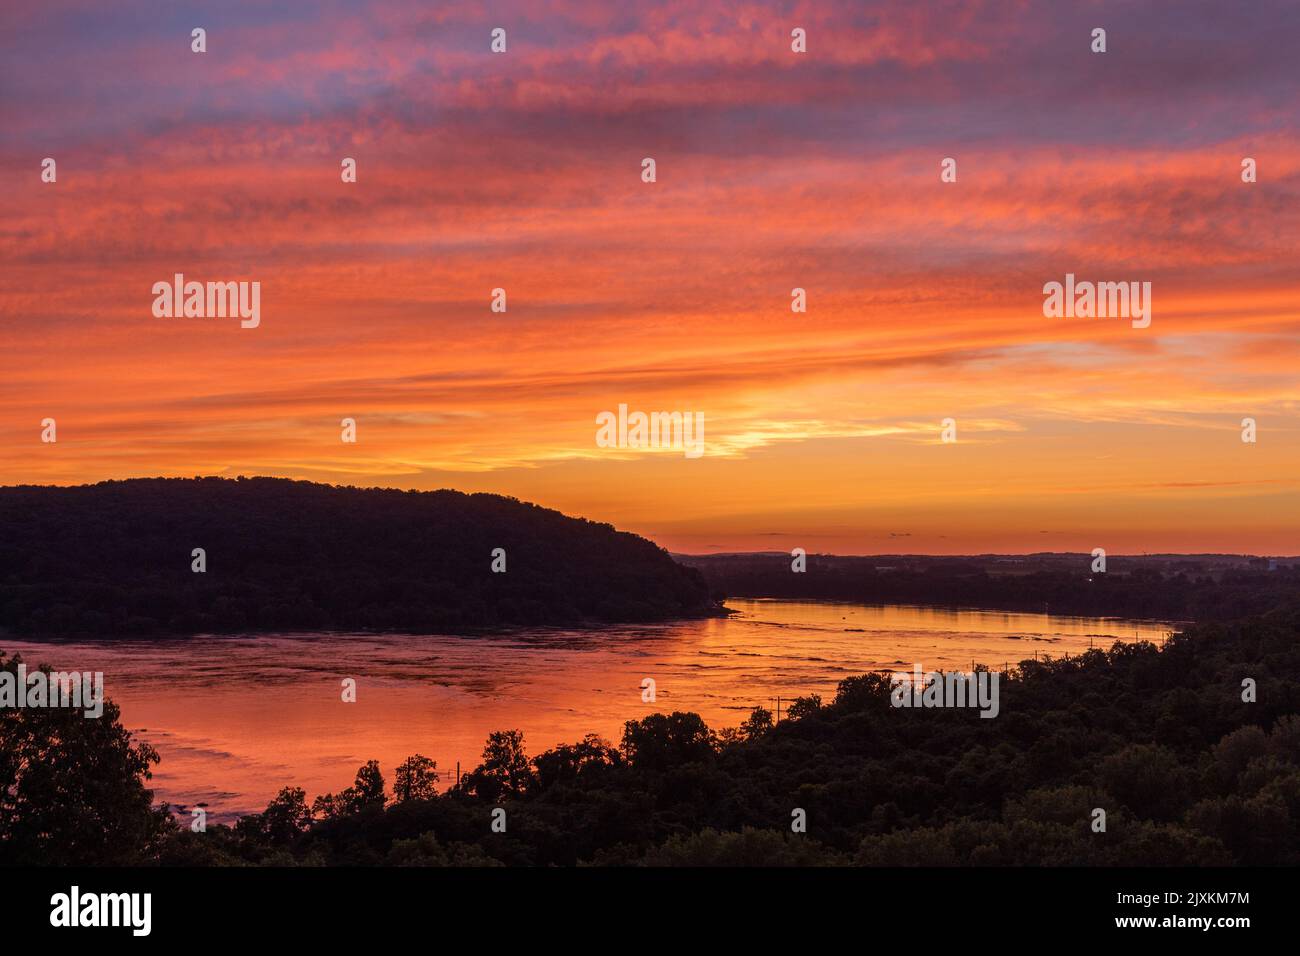 A beautiful sunset over the susquehanna river from Chickies rock in Columbia Pennsylvania. Stock Photo